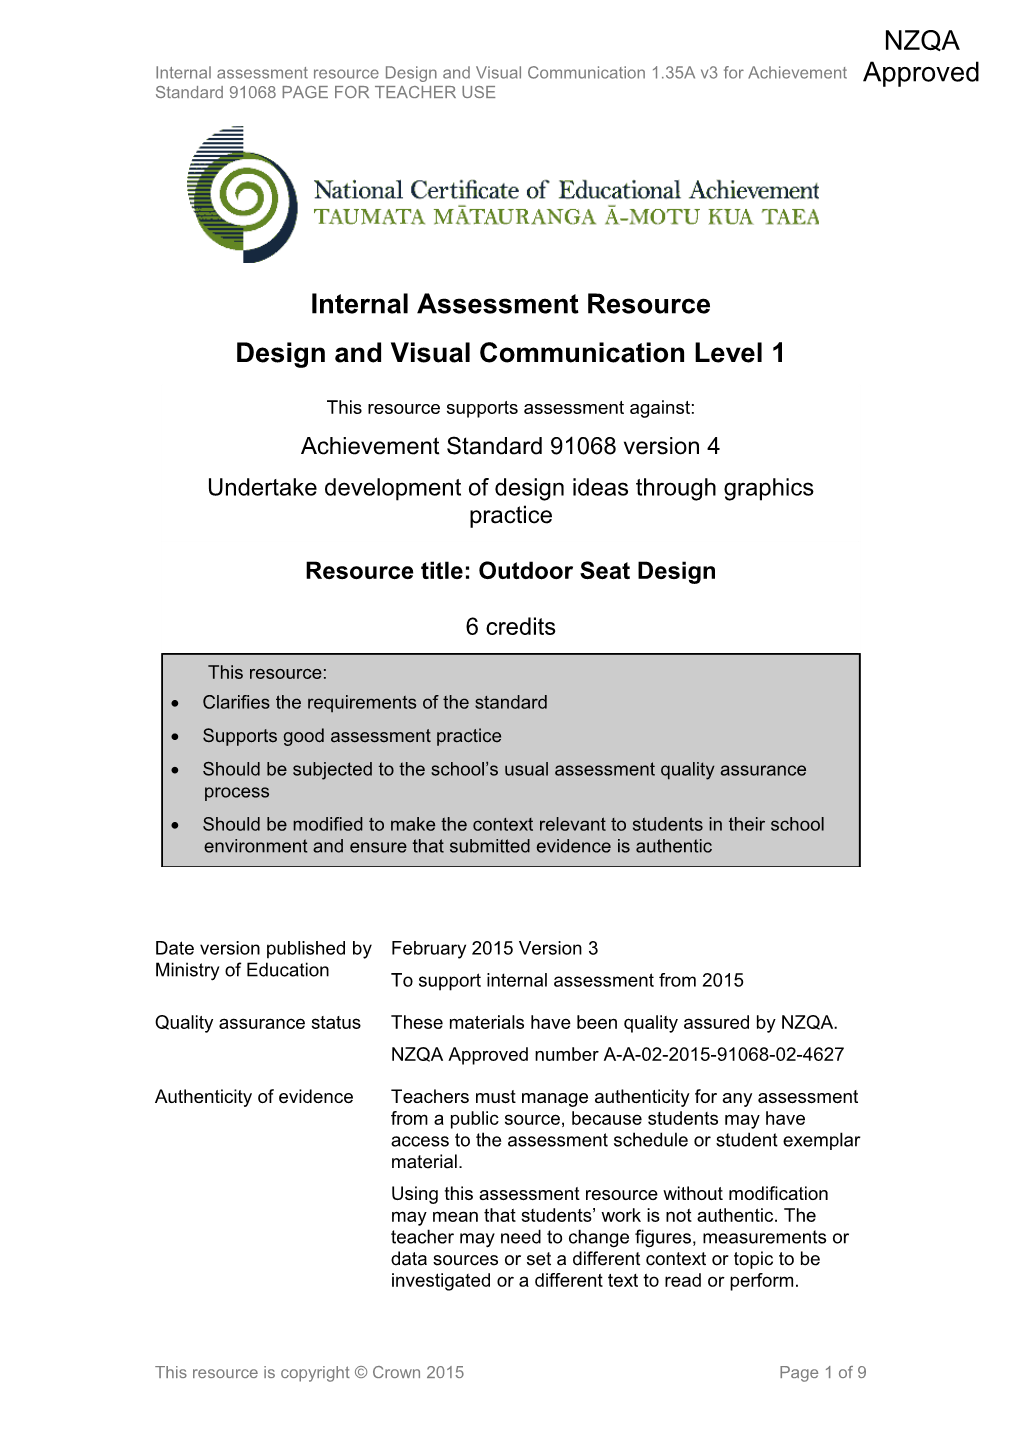 Level 1 Design and Visual Communication Internal Assessment Resource